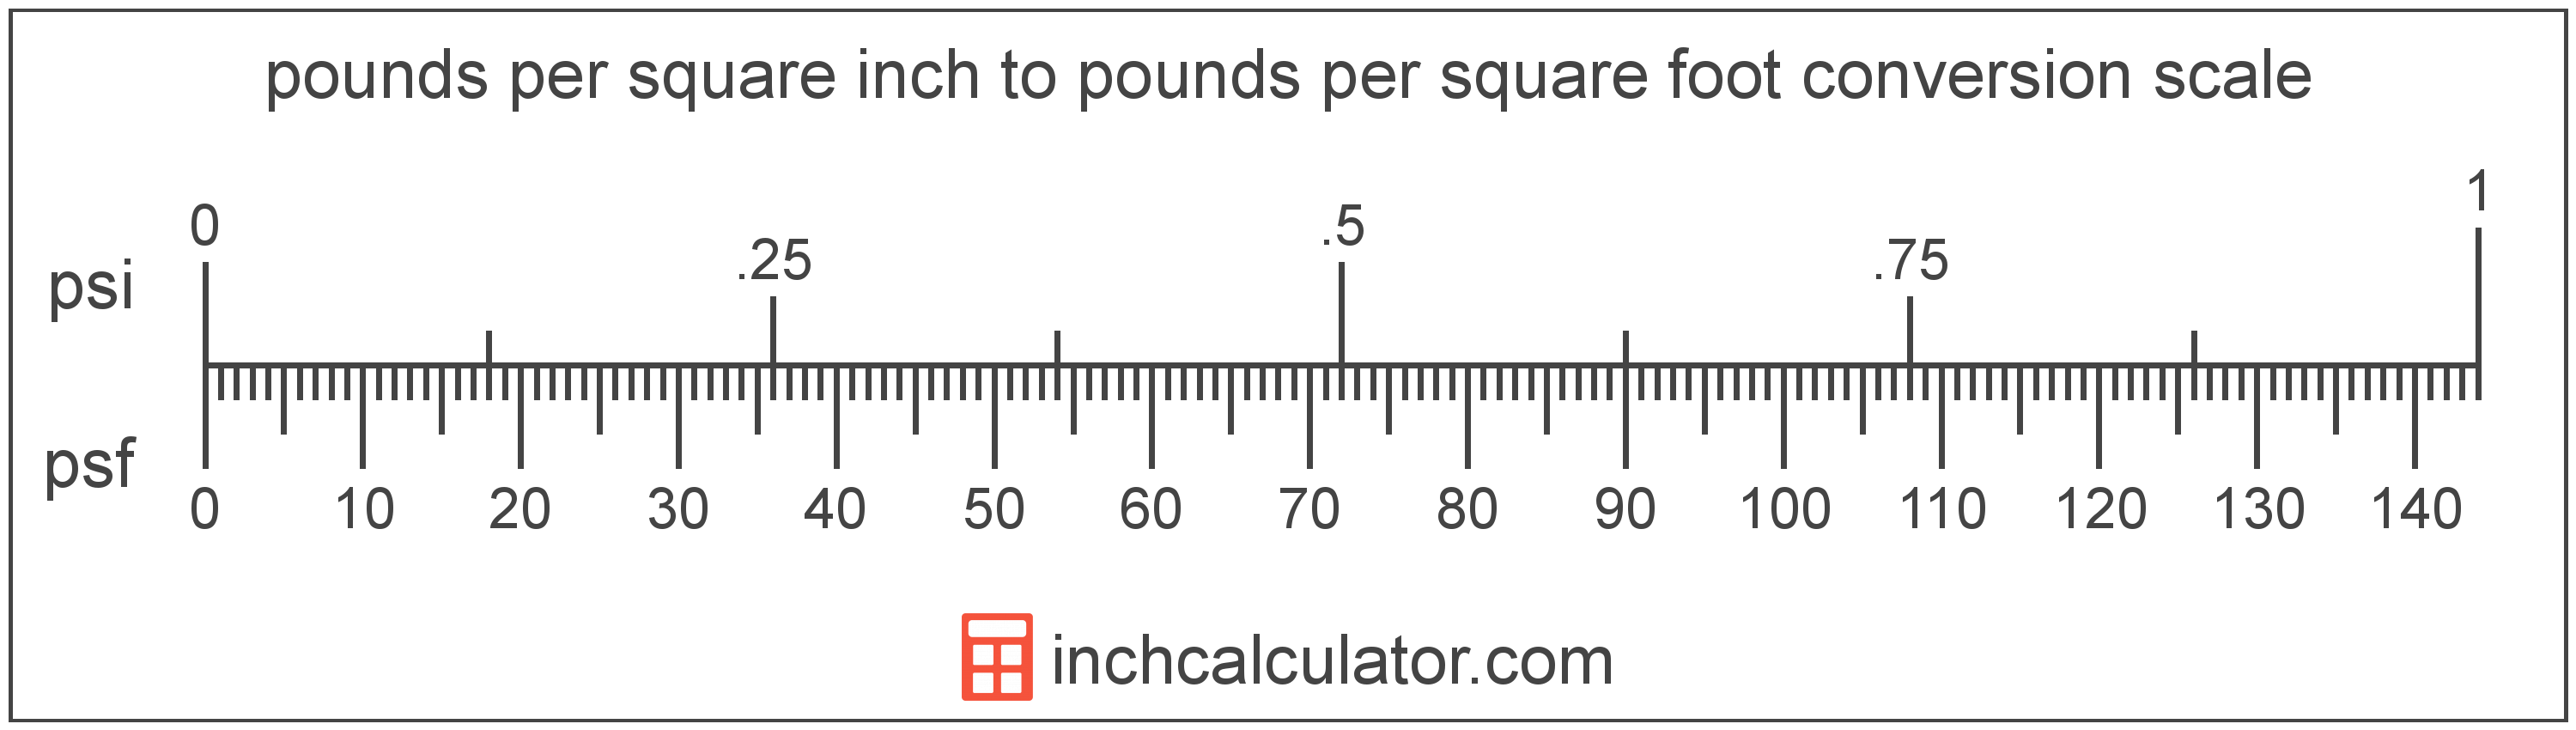 Inch Pounds To Foot Pounds Conversion Chart